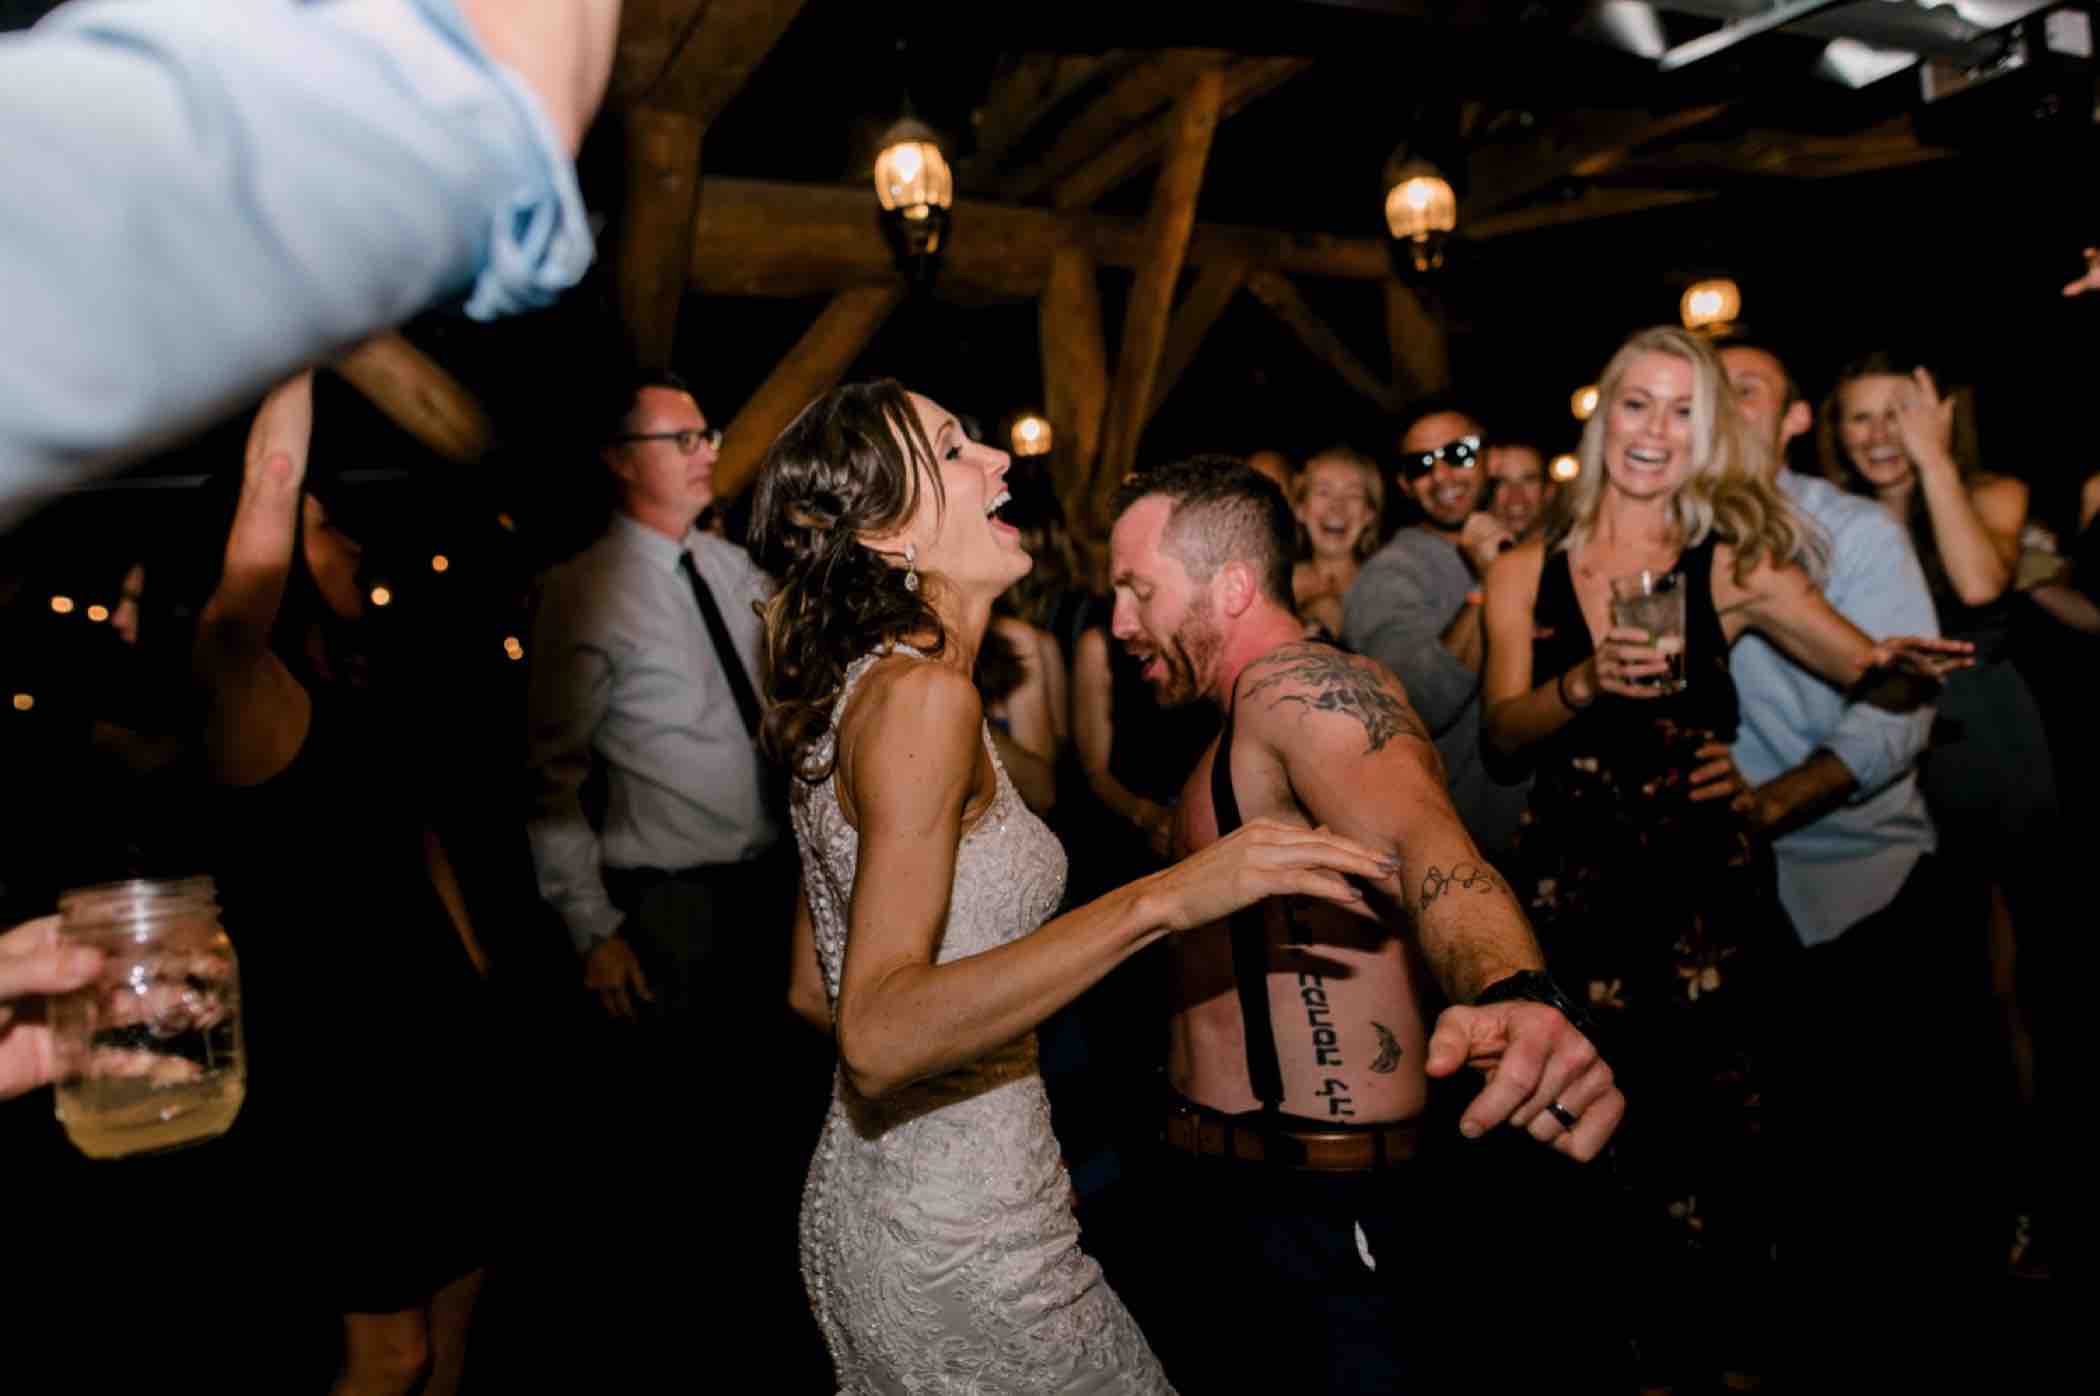 The groom surprised the bride by returning to their wedding reception at Piney River Ranch in Vail, Colorado shirtless. Photo by Ali and Garrett, Romantic, Adventurous, Nostalgic Wedding Photographers.